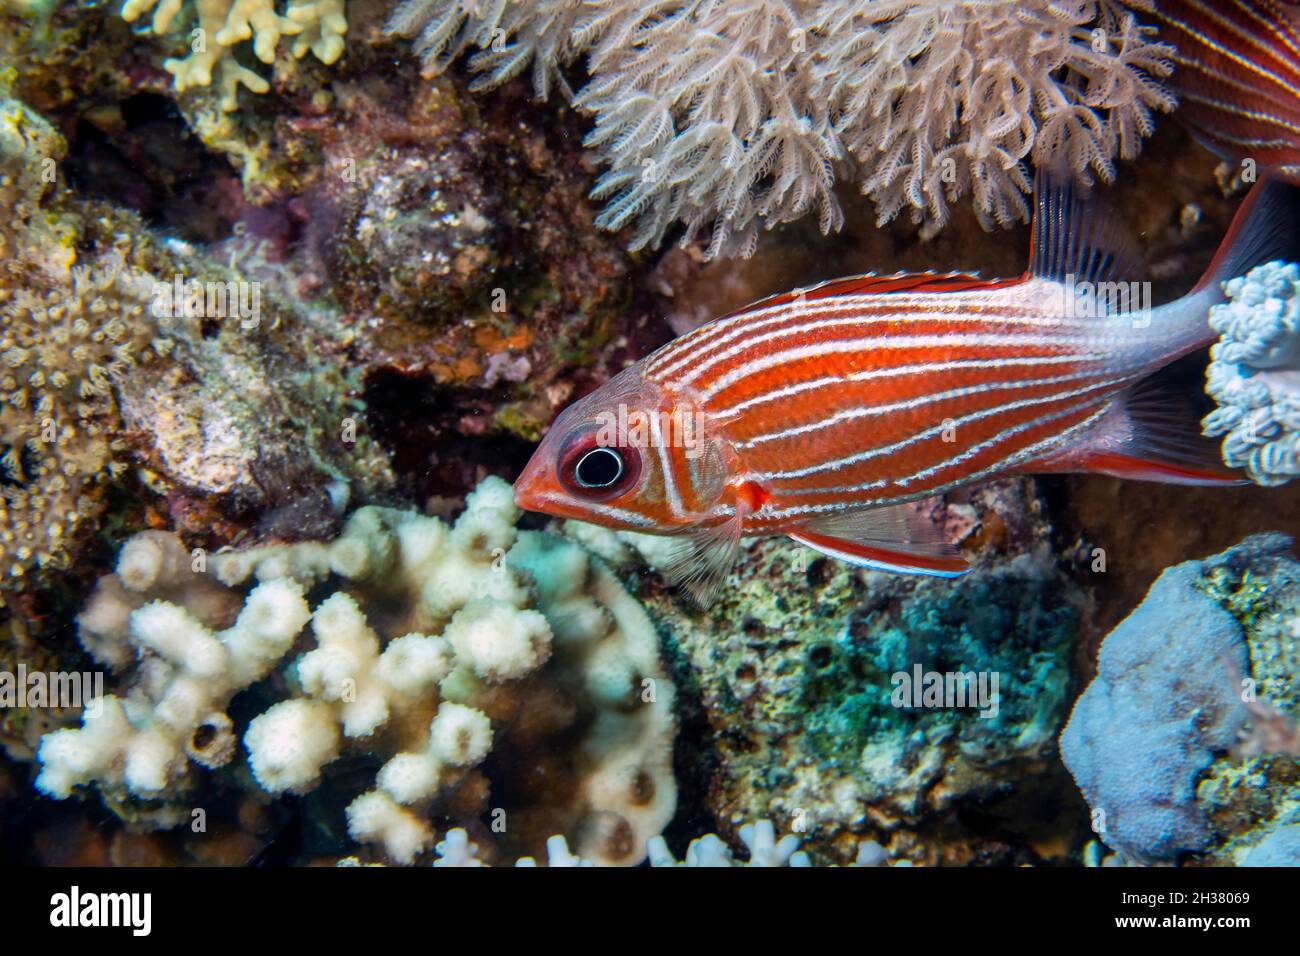 A Crowned Squirrelfish (Sargocentron diadema) in the Red Sea, Egypt Stock Photo